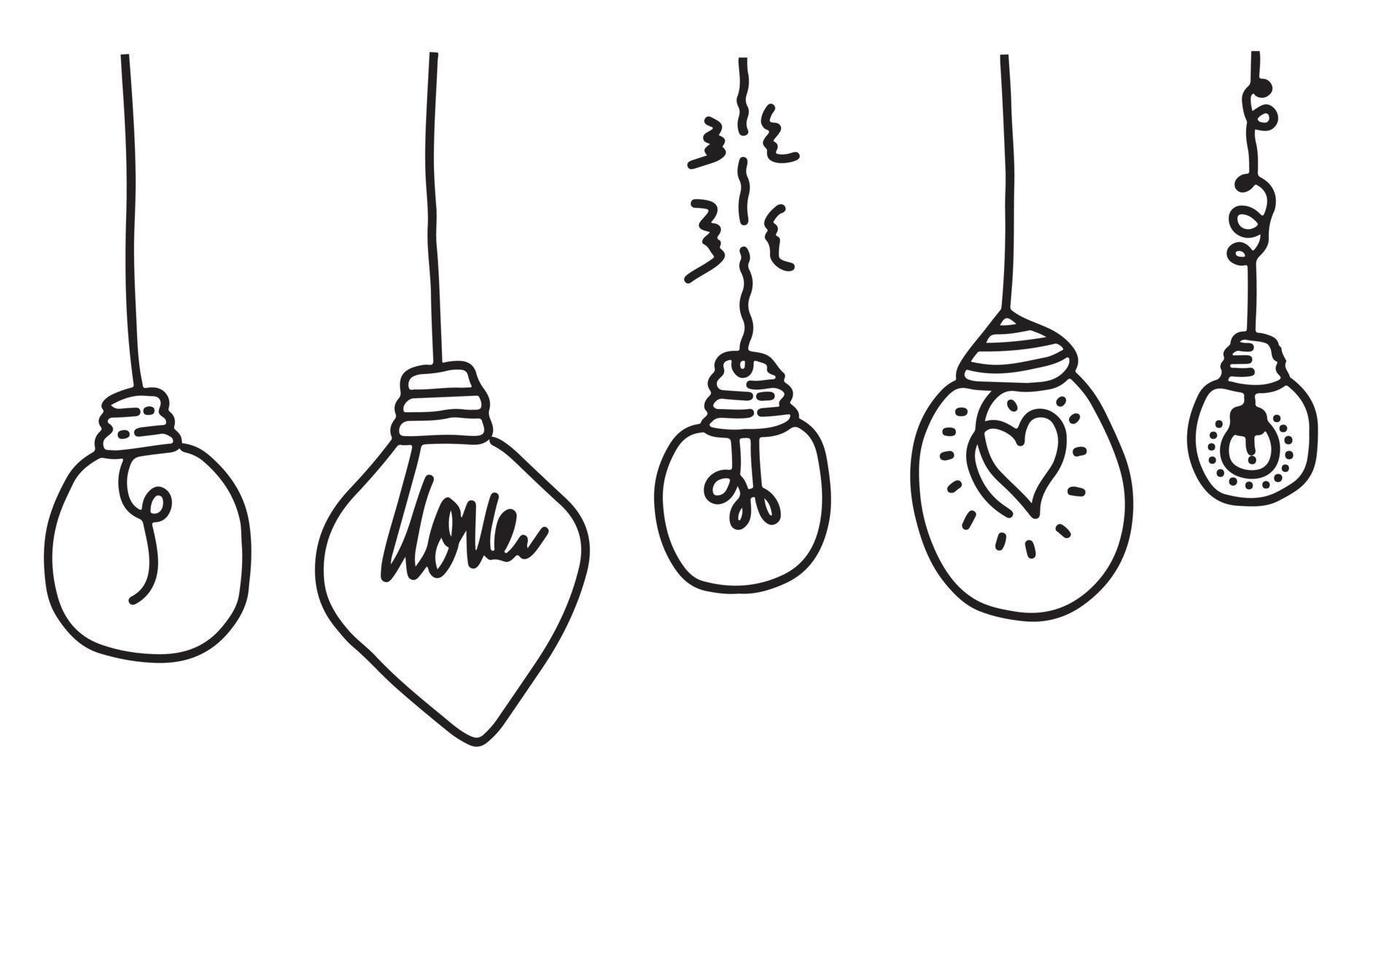 Hand drawn light bulb icons with concept of idea. Doodle style. Vector illustration.